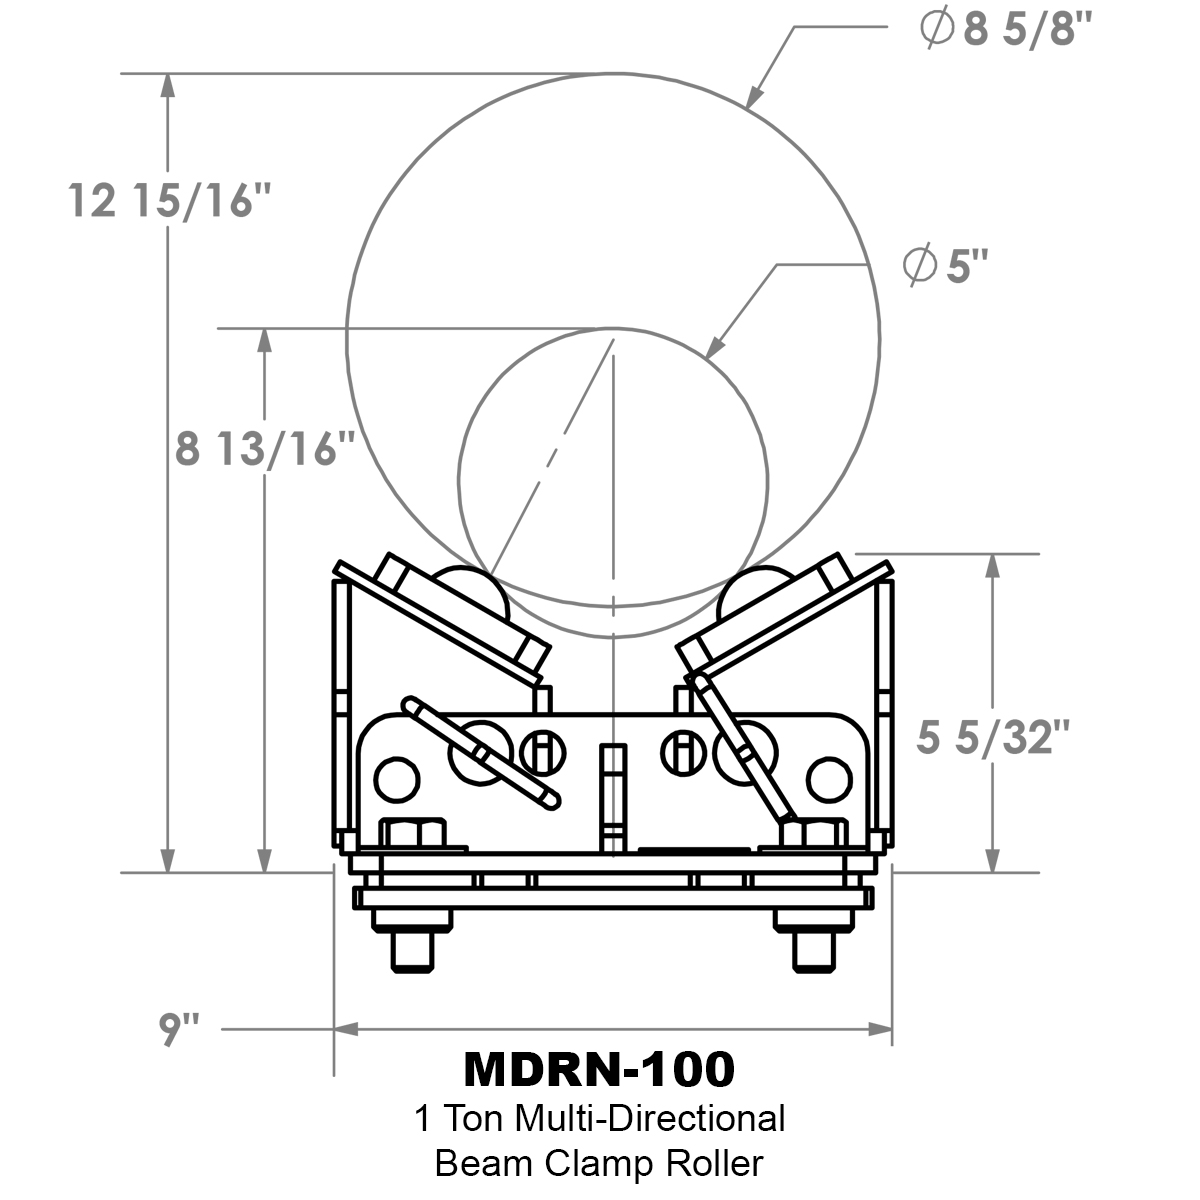 MDRN-100 2000 lbs beam clamp rollers